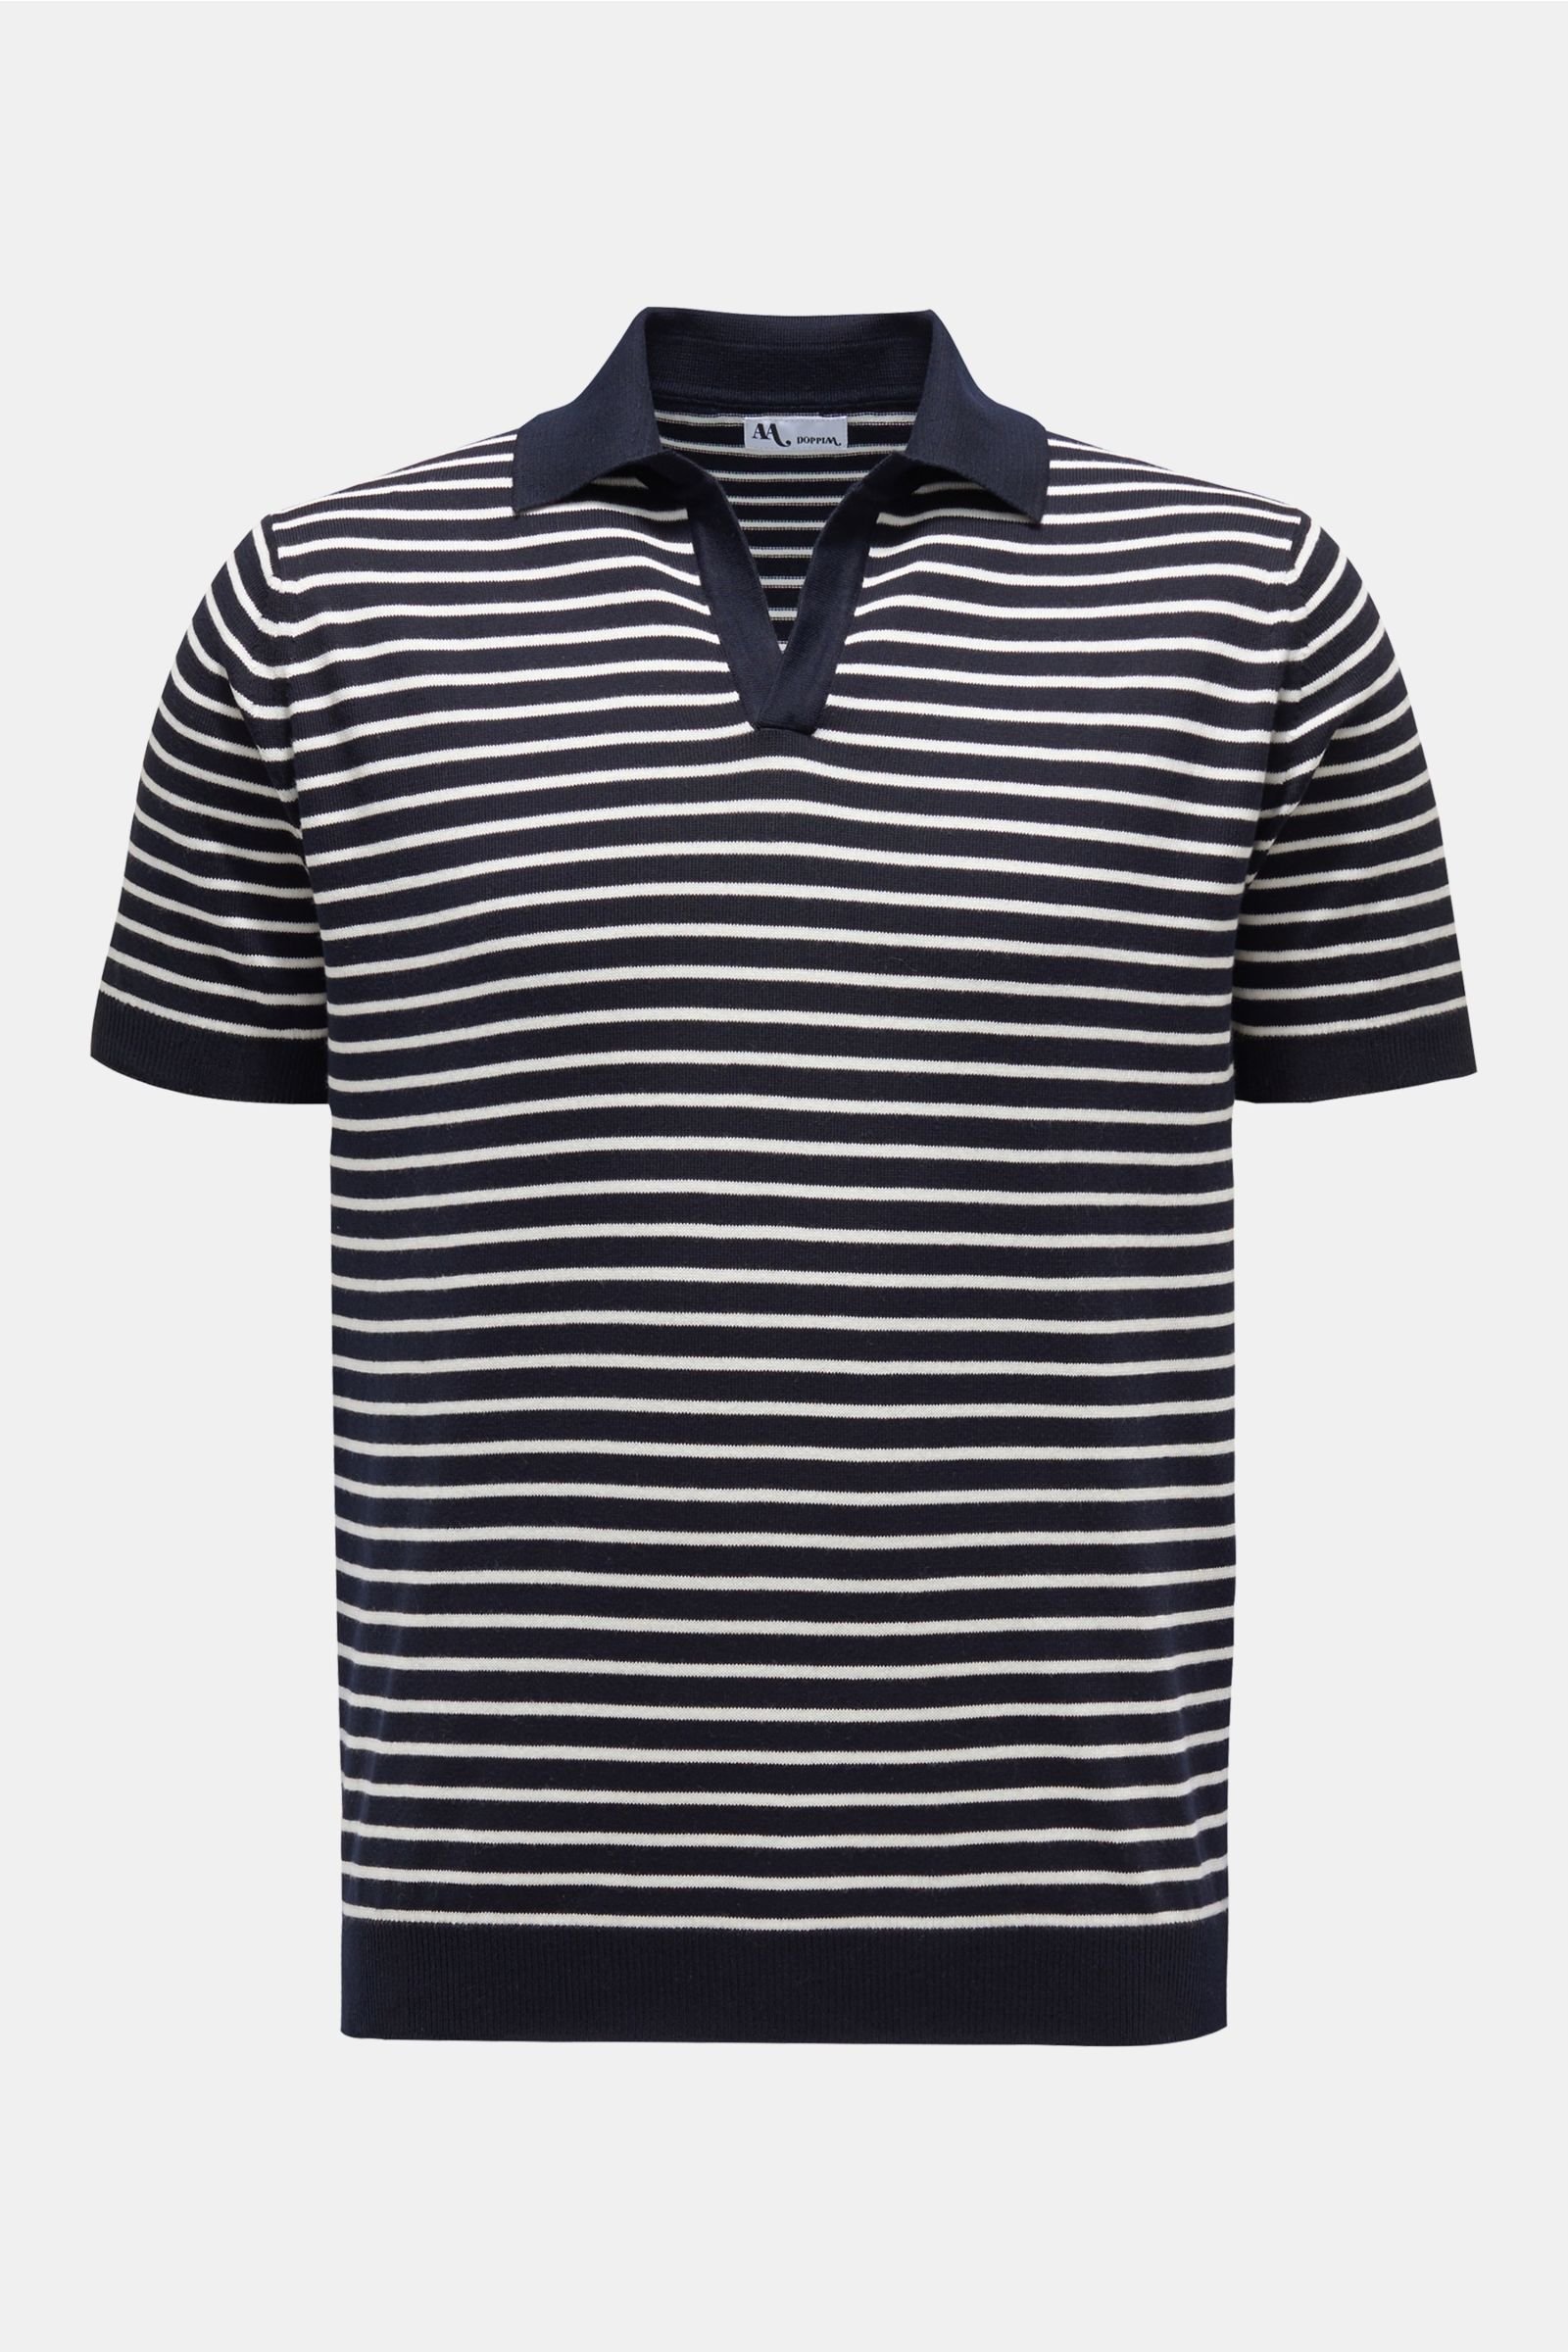 Short sleeve knit polo 'Aavio' navy/off-white striped